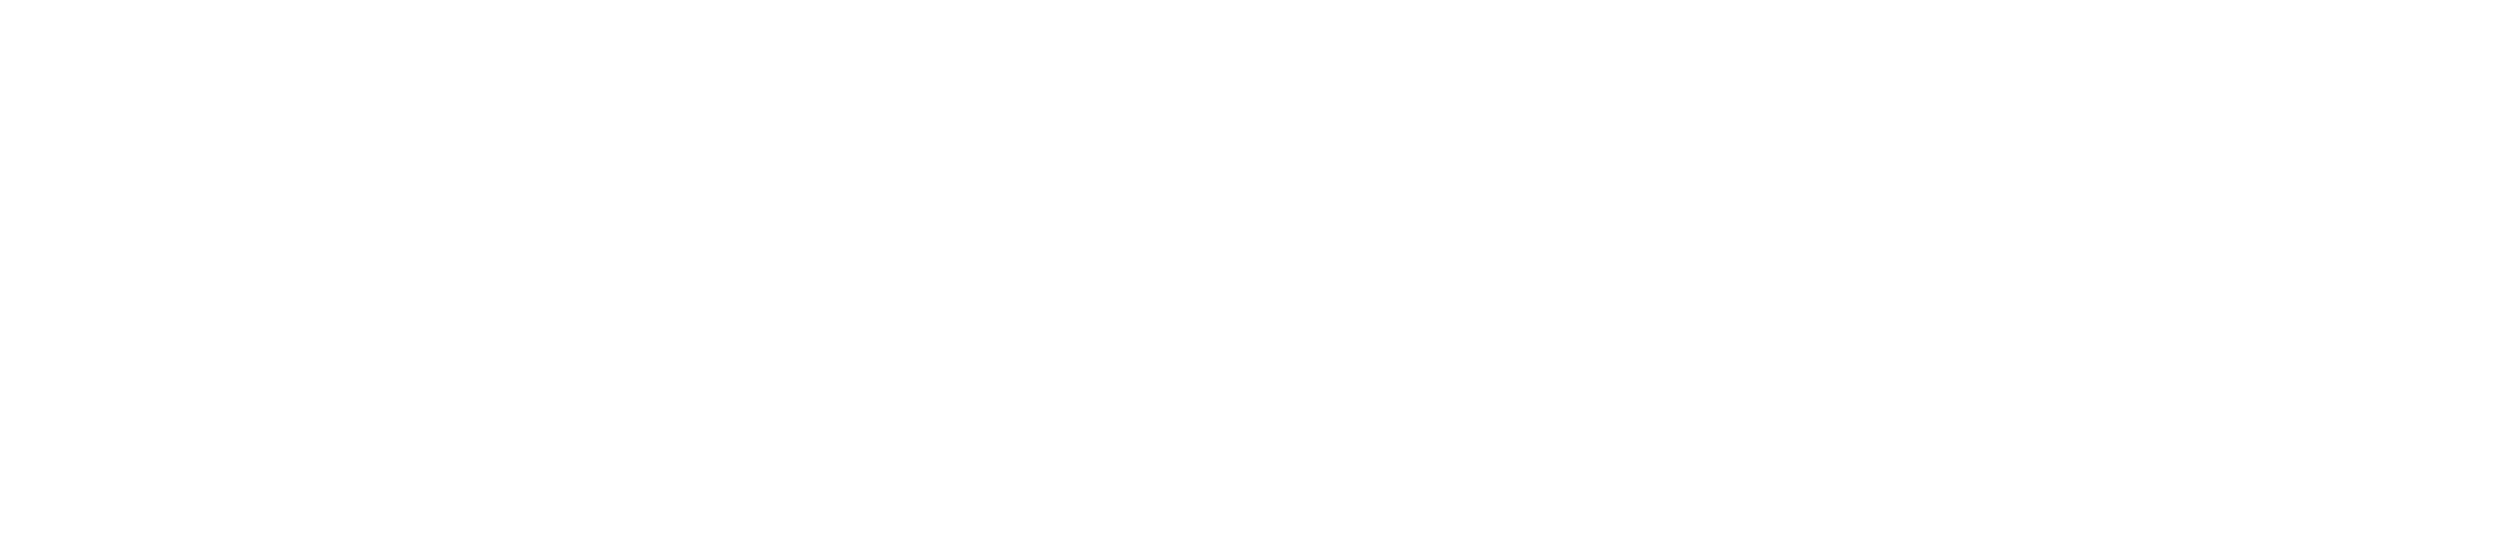 MasterYourTrip